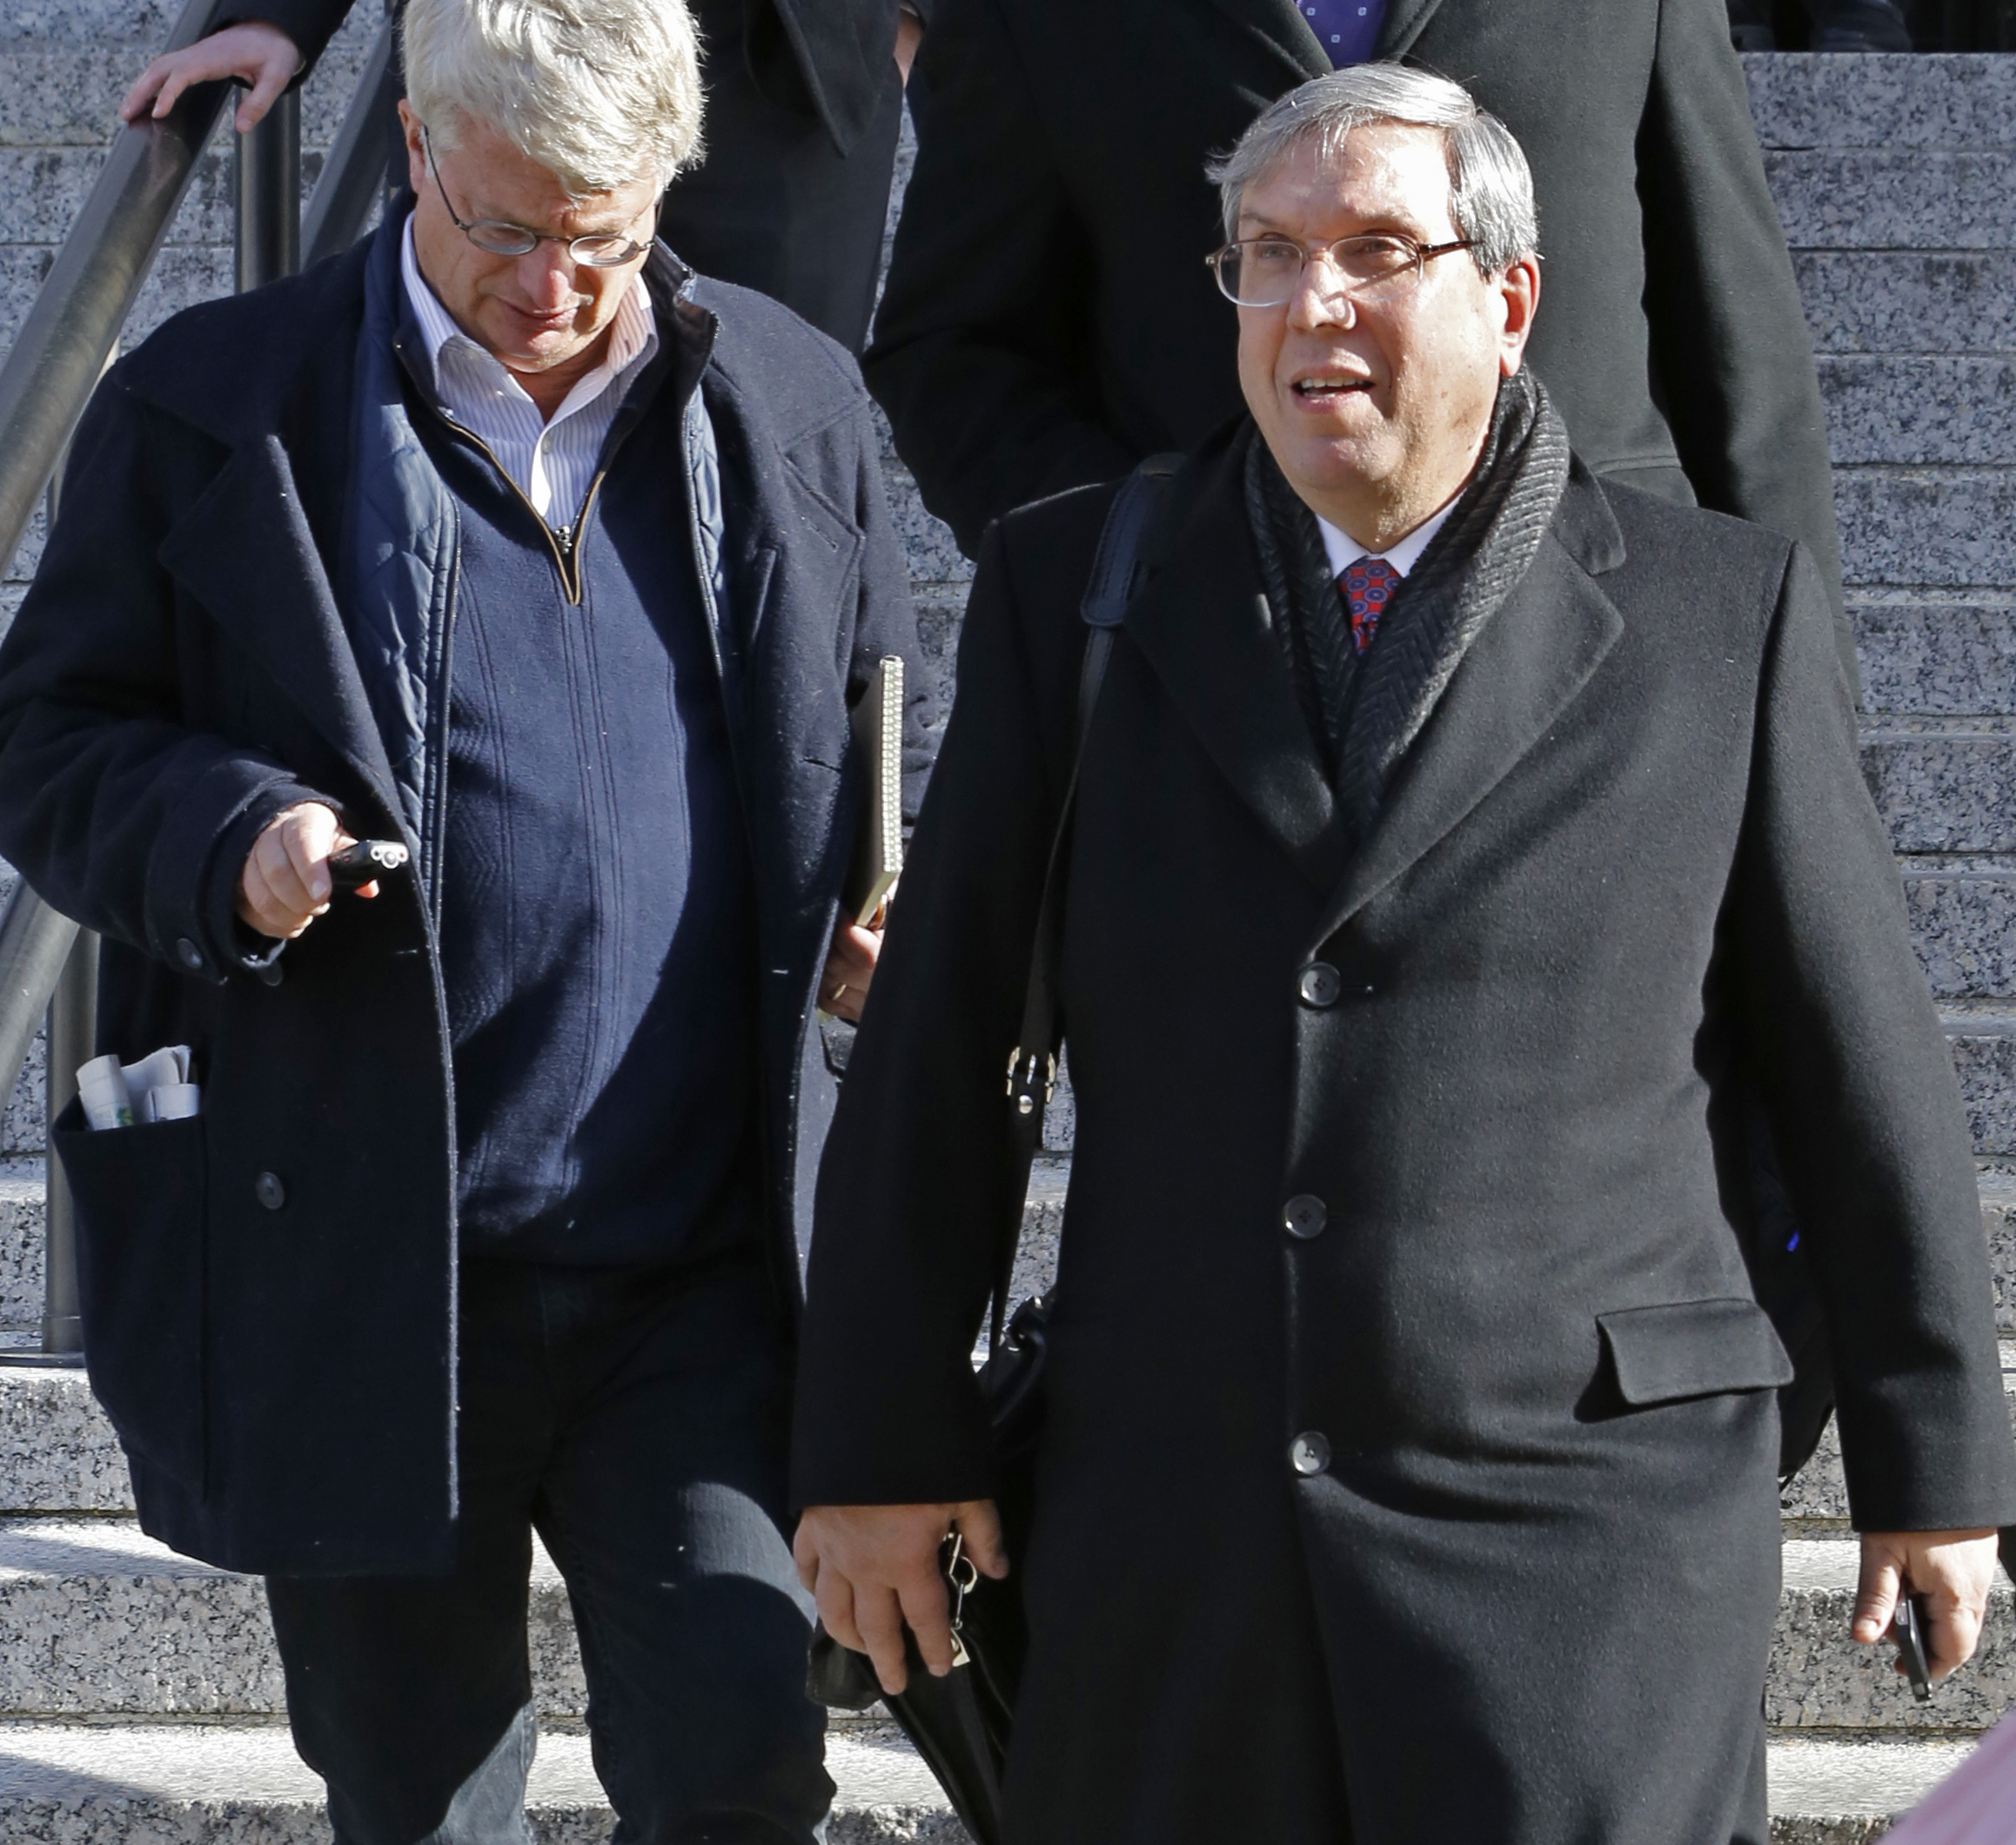 PHOTO: Attorney Jeffrey Kessler, right, who represents New England Patriots quarterback Tom Brady, leaves the 2nd U.S. District Court of Appeals, March 3, 2016, in New York.